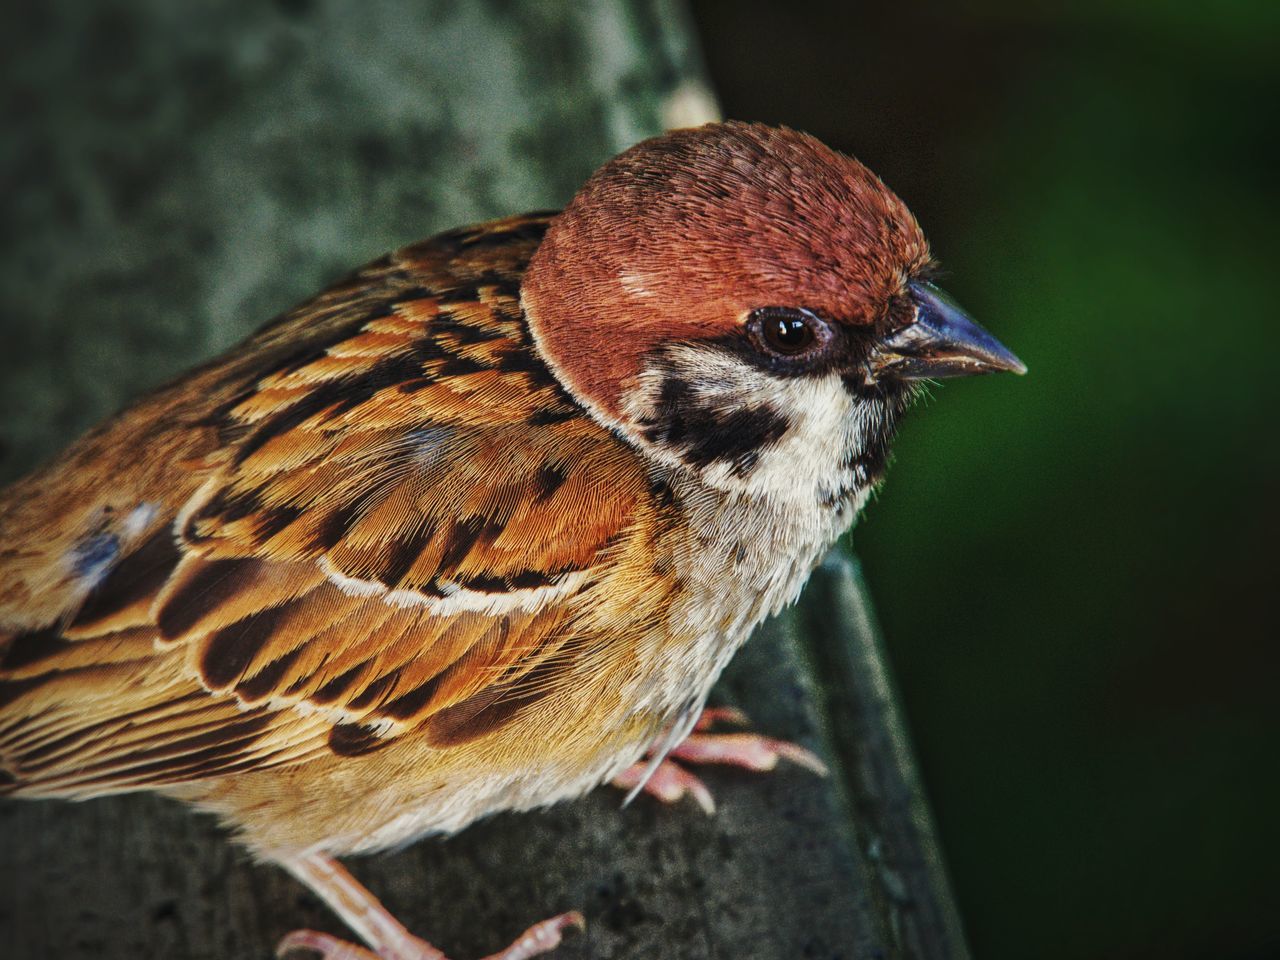 CLOSE-UP OF SPARROW PERCHING ON WOOD